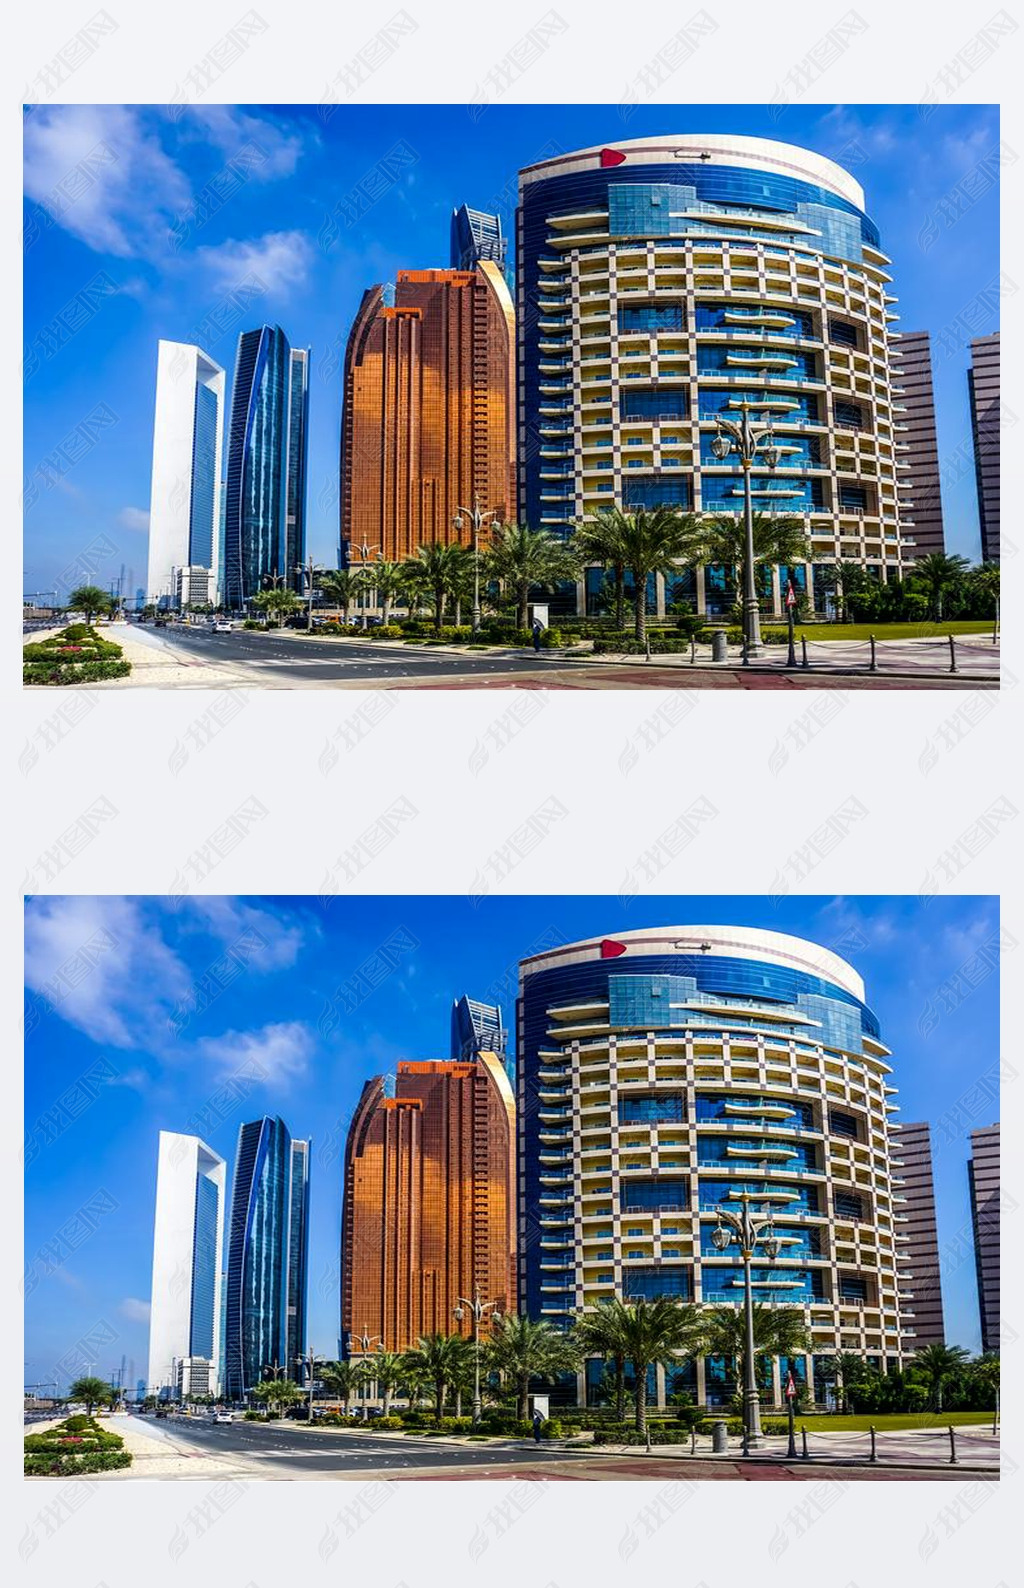 Abu Dhabi Picturesque Breathtaking Highrises with Blue Windows and Palm Trees